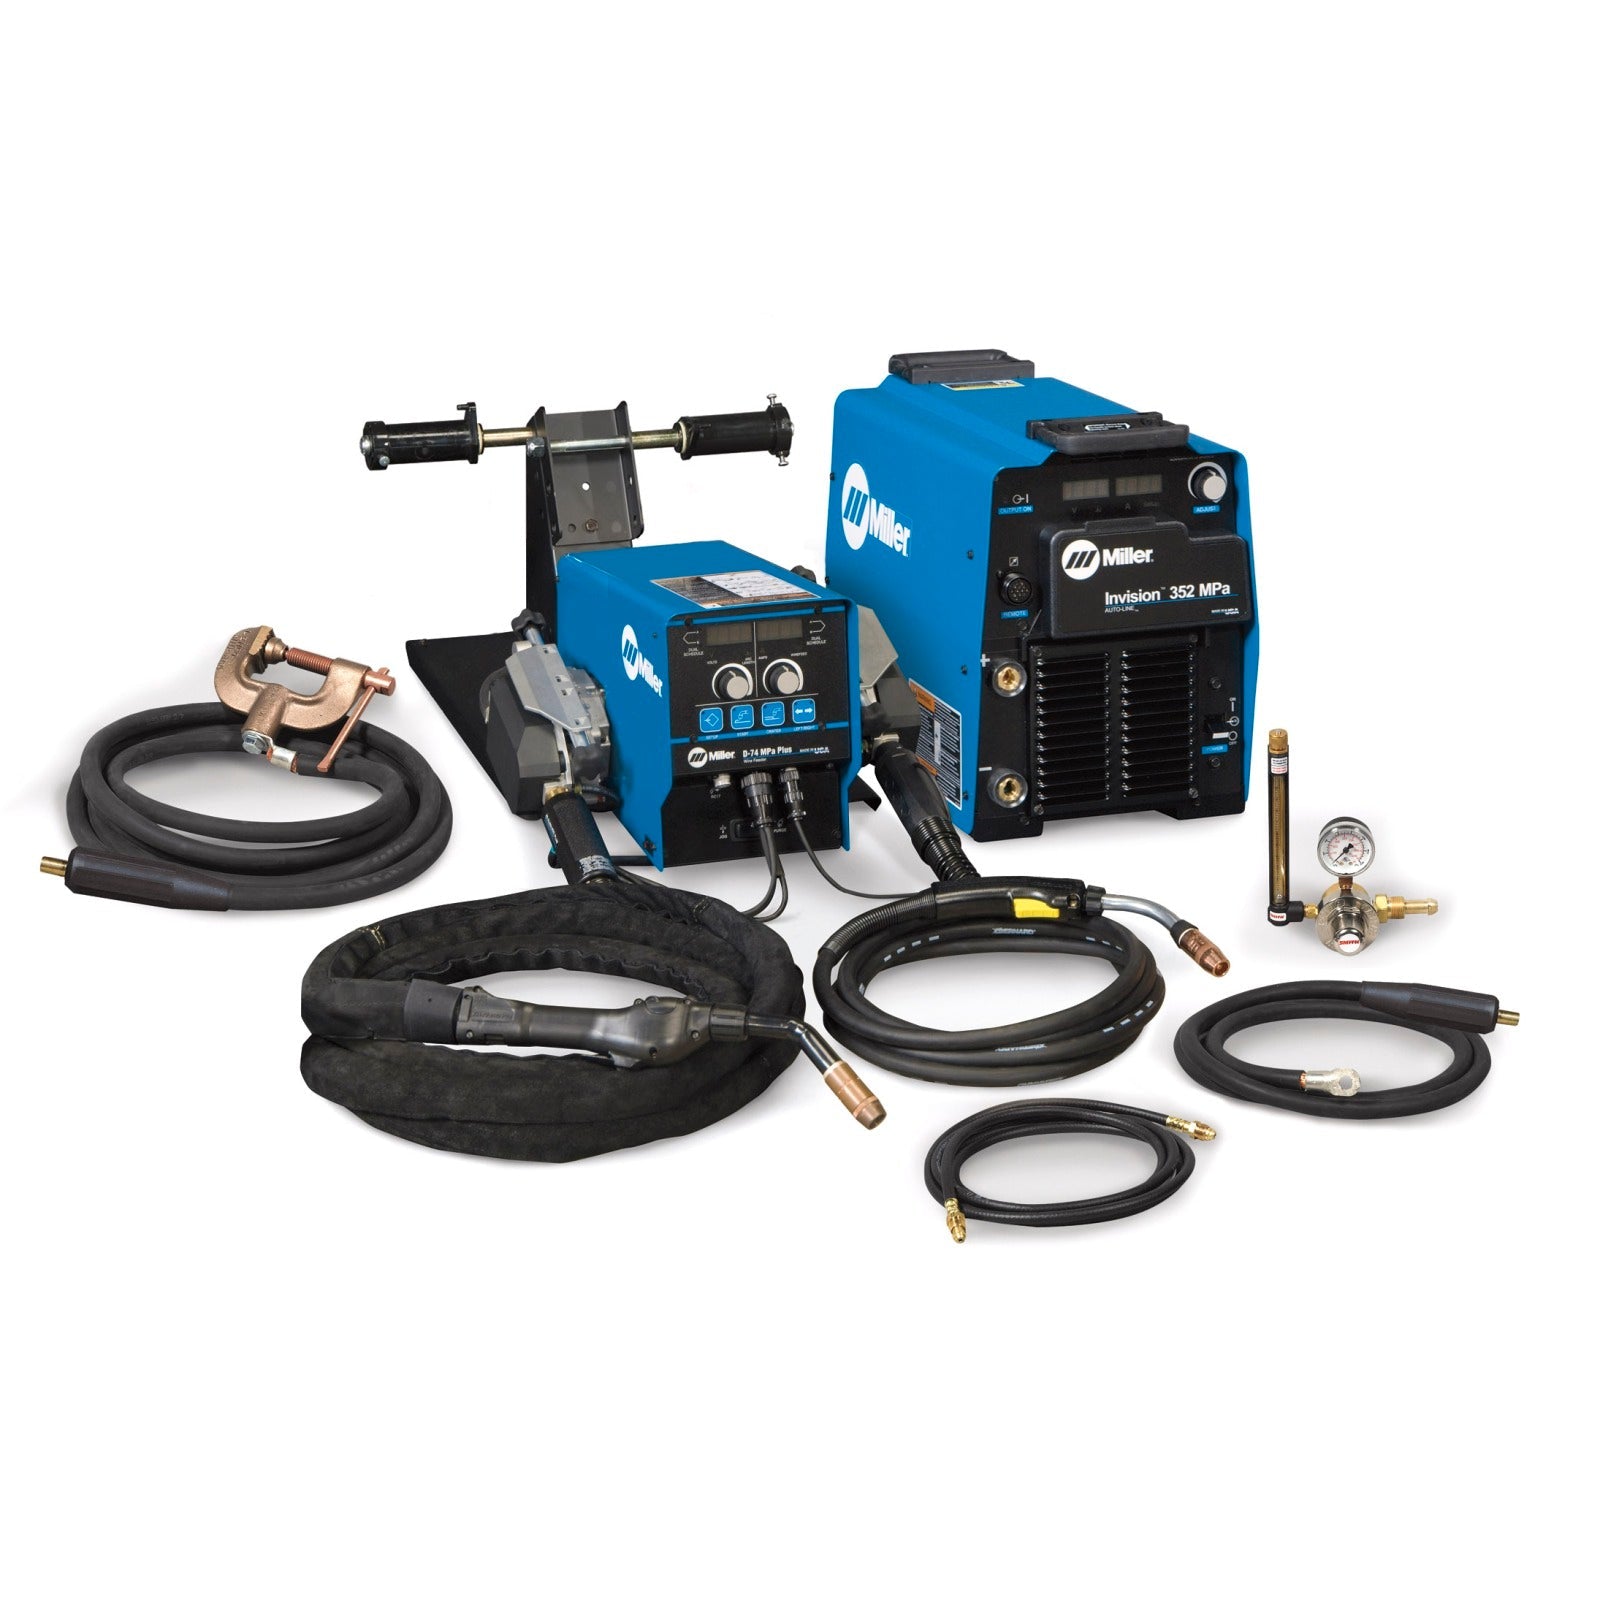 Miller Invision 352 MPa MIG Welder with D-74 Feeder, Accessory Package, and Cart (951501)